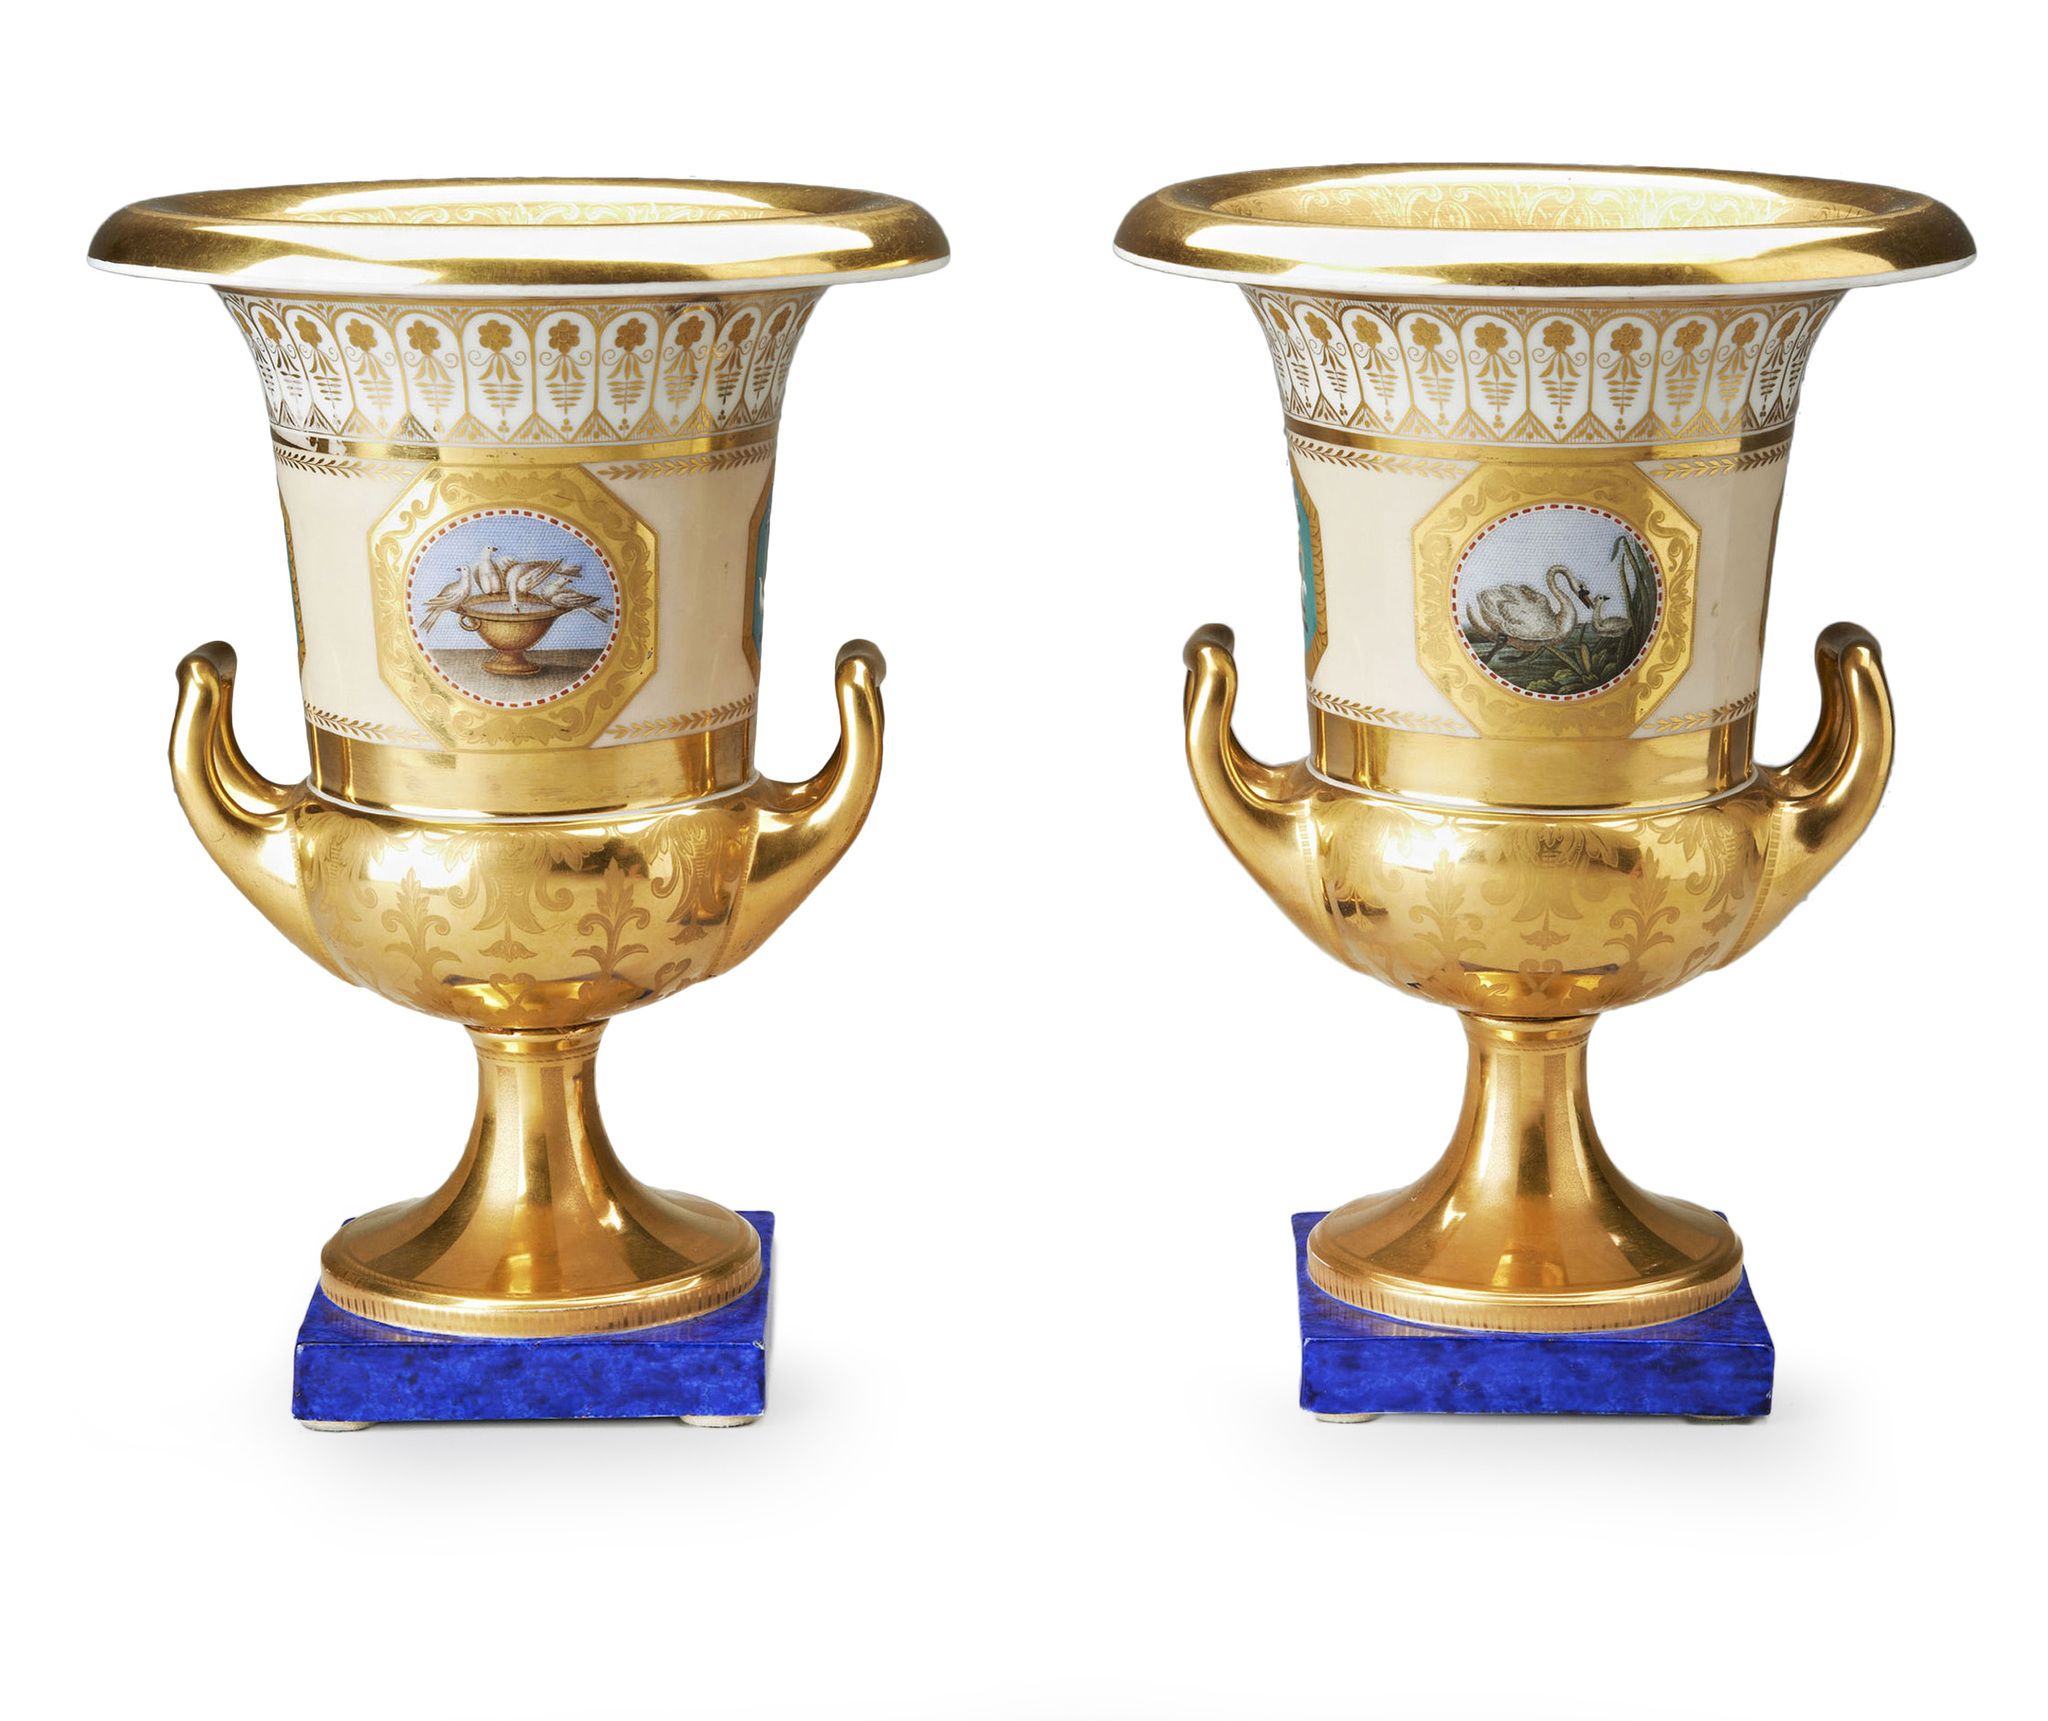 A Pair of Berlin Porcelain Vases Germany circa 1825, each decorated on both sides with circular